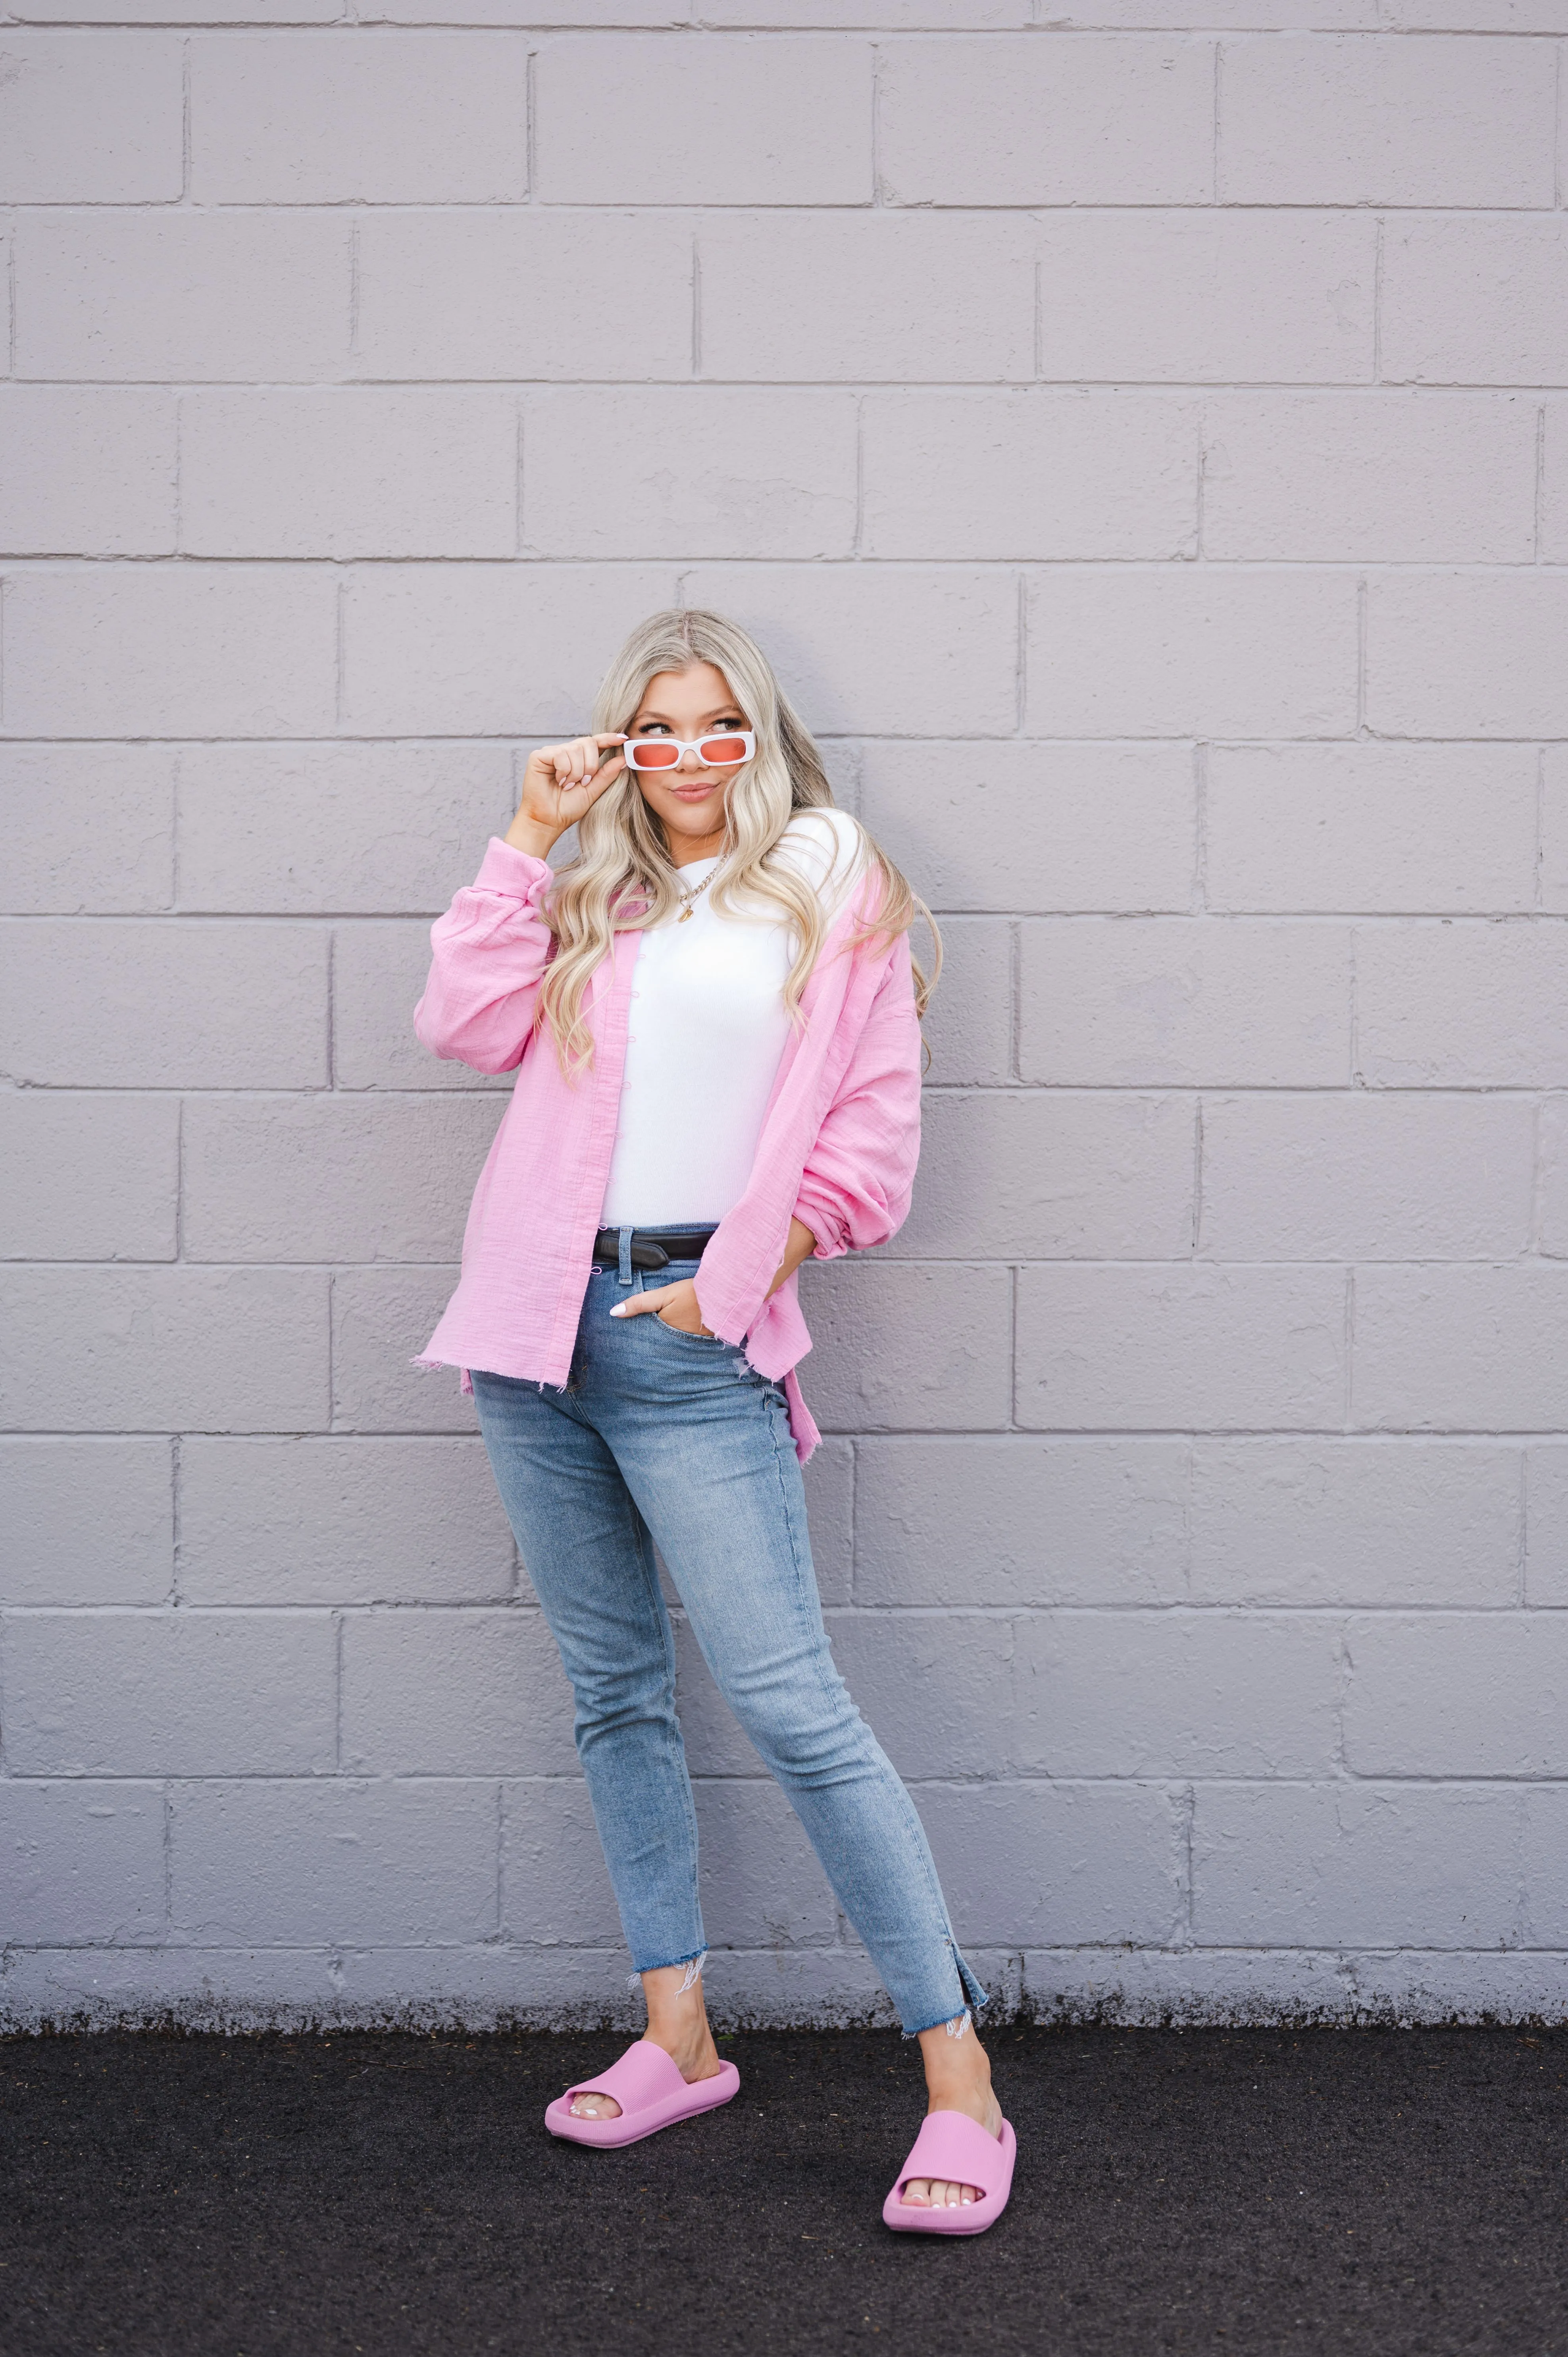 A woman in a pink jacket and blue jeans standing against a gray brick wall, playfully adjusting her white sunglasses.